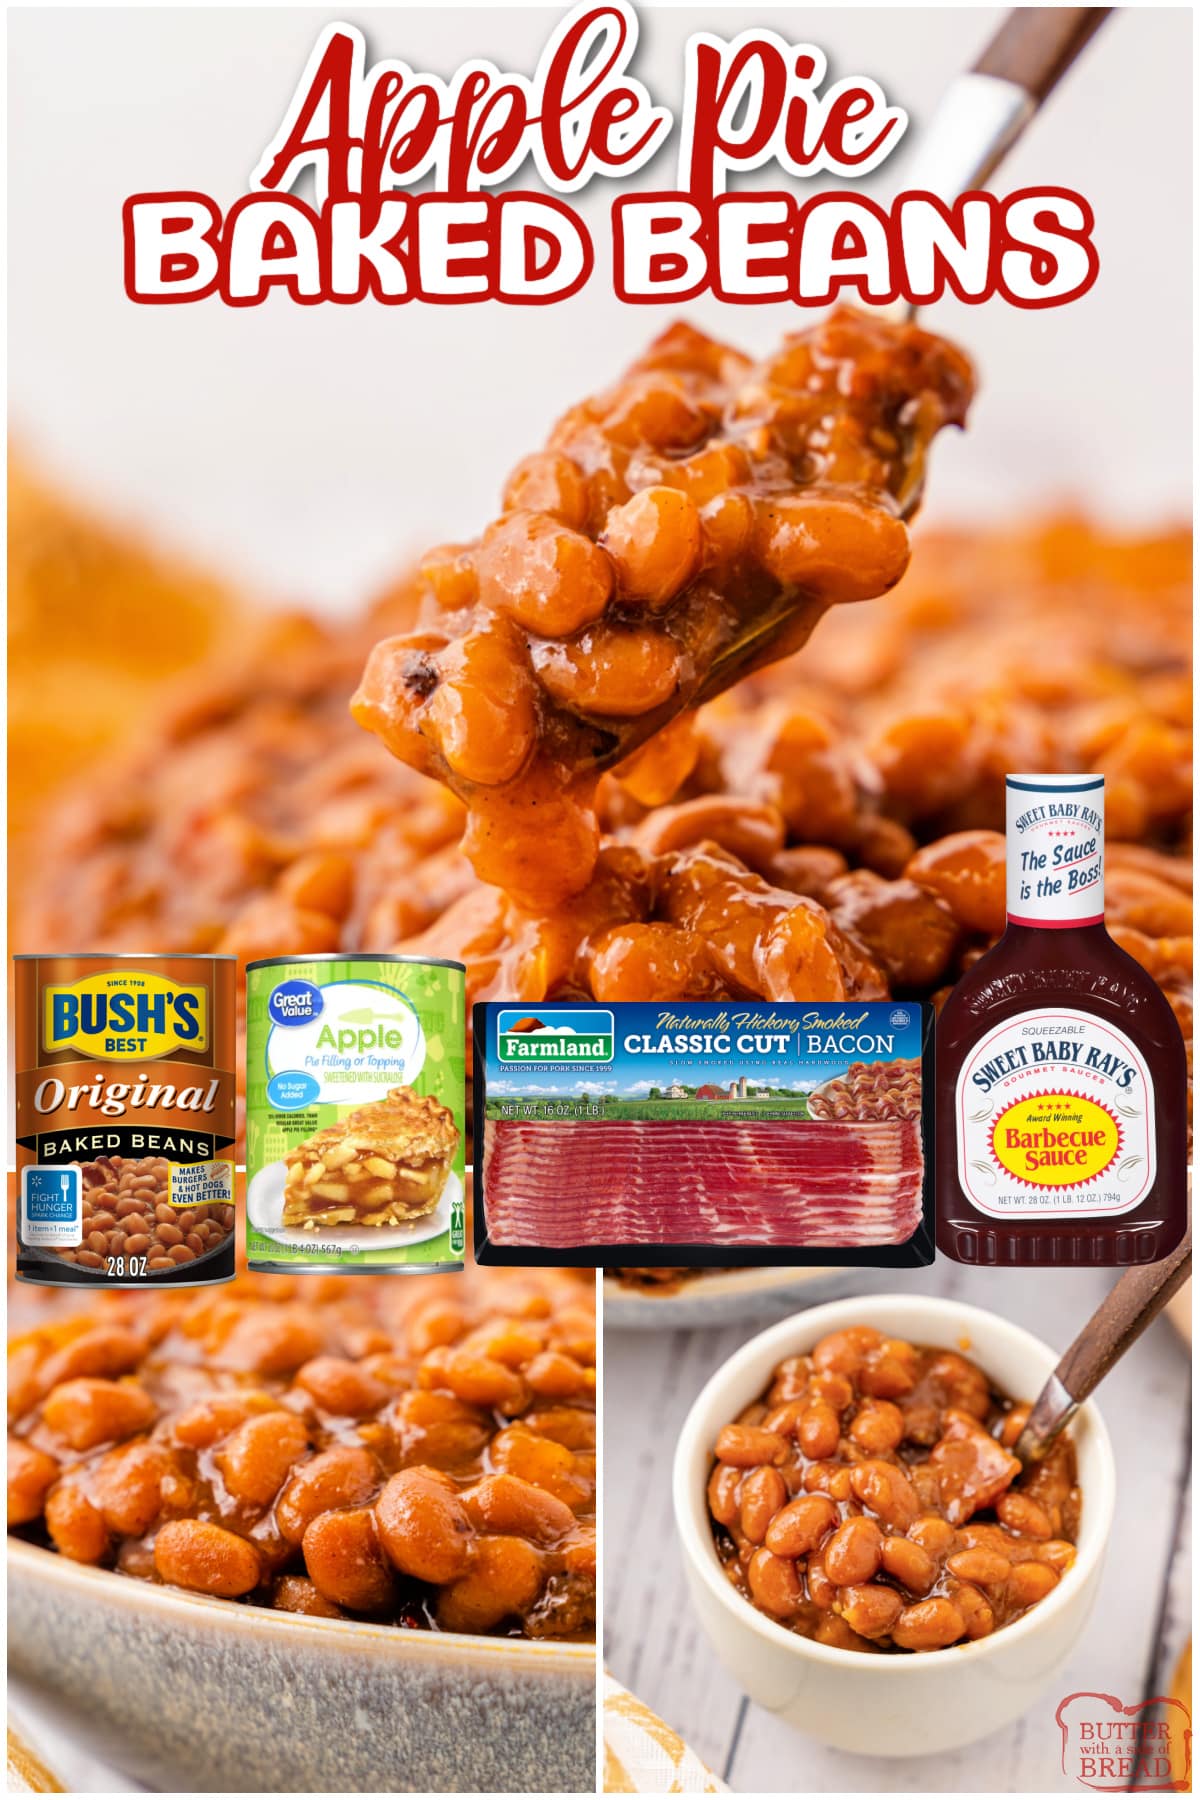 Apple Pie Baked Beans take traditional baked beans to a whole other level! Only 6 ingredients to make this delicious side dish that is perfect for any BBQ.